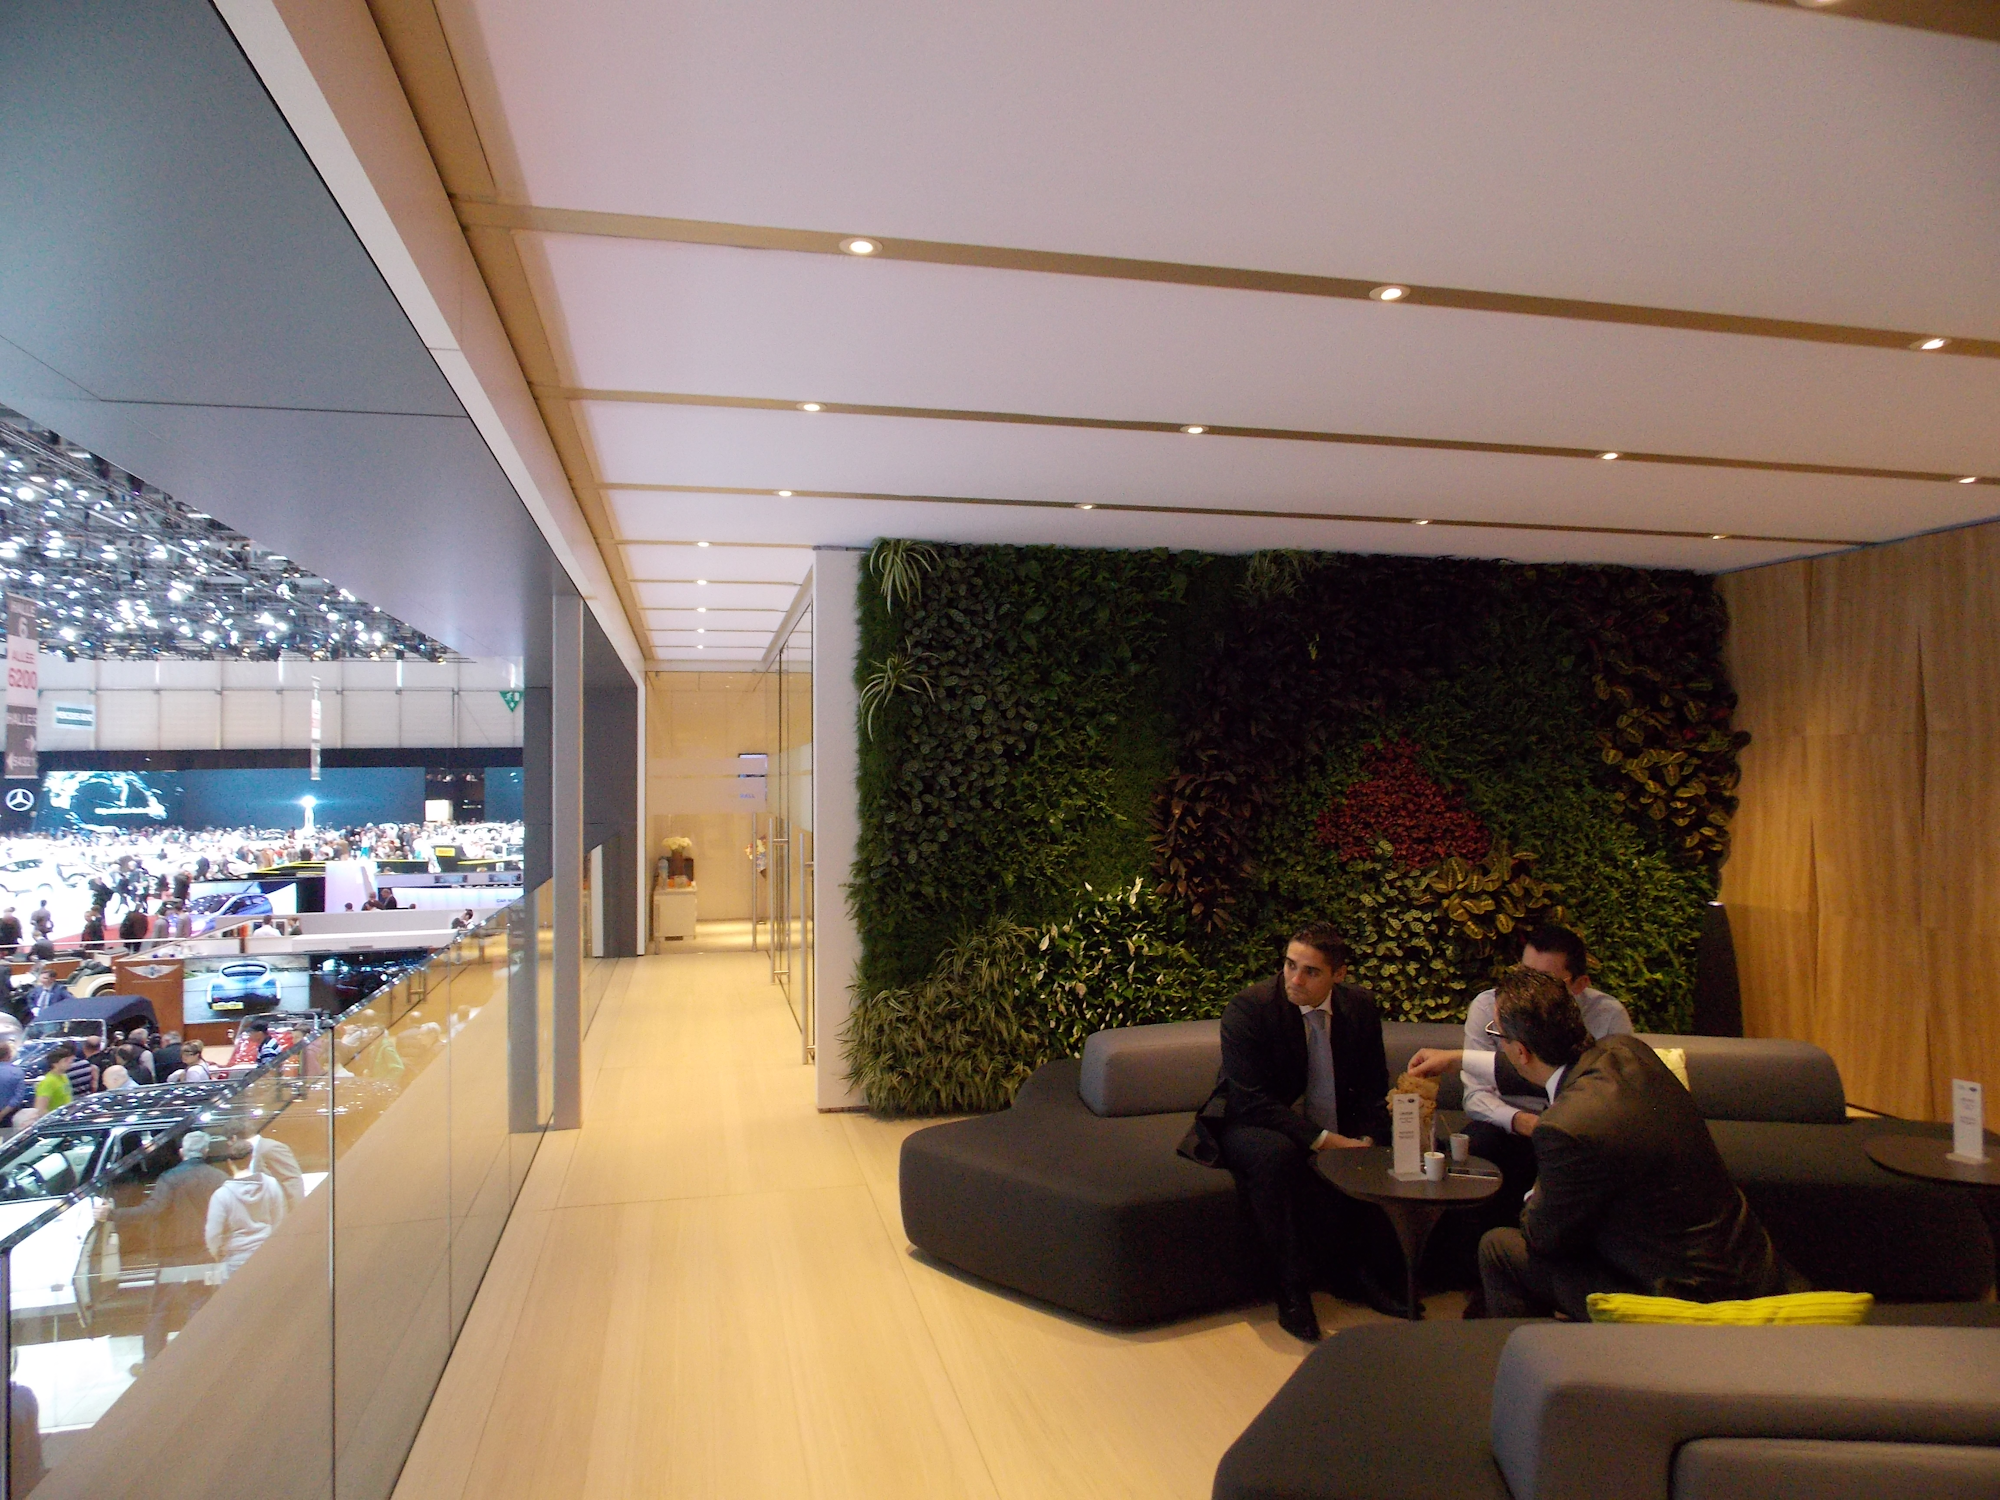 clients in a collaboration area having a meeting in front of an interior planted living wall